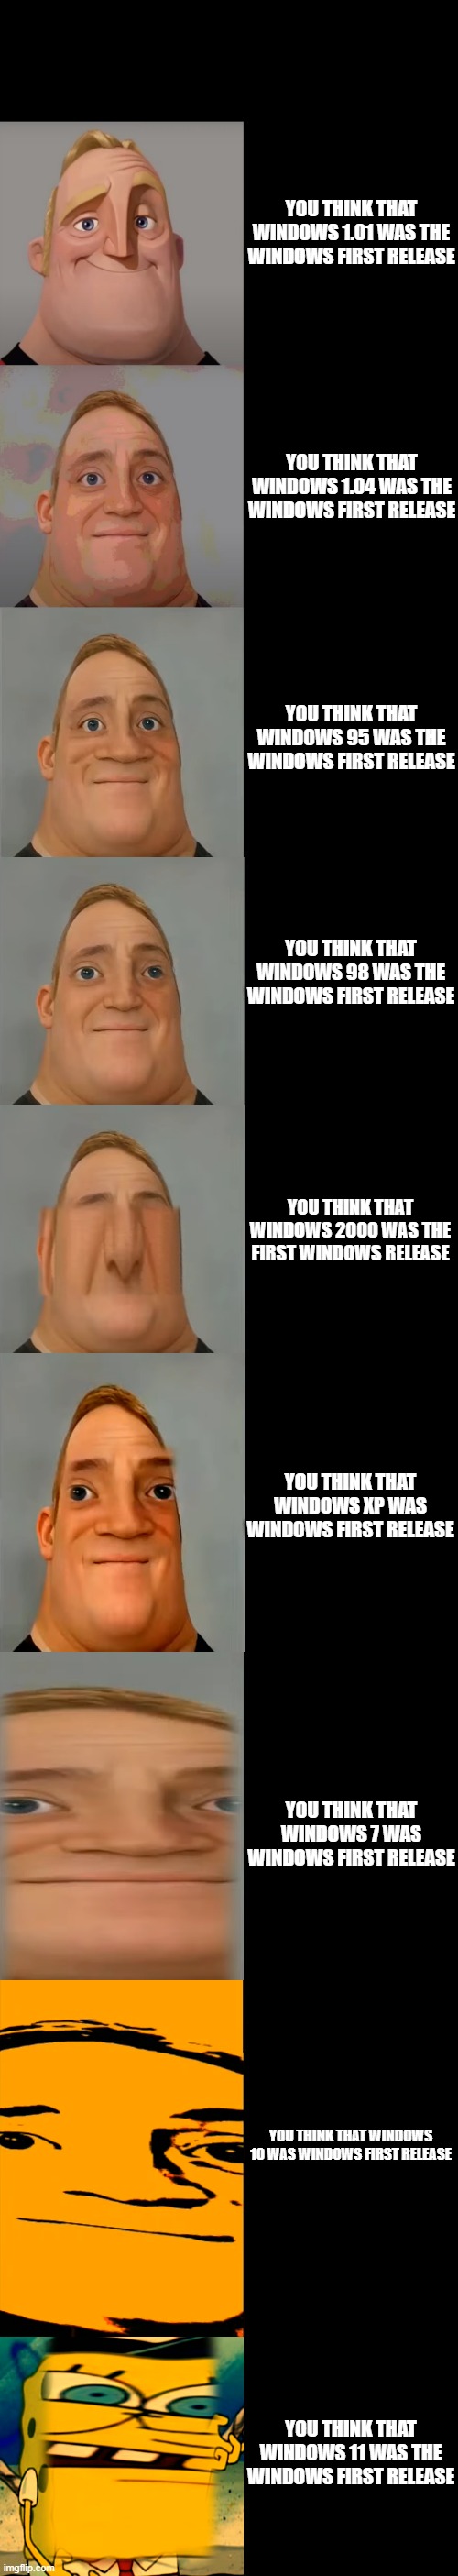 Mr incredible becoming idiot (you think that this version was first windows version) | YOU THINK THAT WINDOWS 1.01 WAS THE WINDOWS FIRST RELEASE; YOU THINK THAT WINDOWS 1.04 WAS THE WINDOWS FIRST RELEASE; YOU THINK THAT WINDOWS 95 WAS THE WINDOWS FIRST RELEASE; YOU THINK THAT WINDOWS 98 WAS THE WINDOWS FIRST RELEASE; YOU THINK THAT WINDOWS 2000 WAS THE FIRST WINDOWS RELEASE; YOU THINK THAT WINDOWS XP WAS WINDOWS FIRST RELEASE; YOU THINK THAT WINDOWS 7 WAS WINDOWS FIRST RELEASE; YOU THINK THAT WINDOWS 10 WAS WINDOWS FIRST RELEASE; YOU THINK THAT WINDOWS 11 WAS THE WINDOWS FIRST RELEASE | image tagged in mr incredible becoming idiot template | made w/ Imgflip meme maker